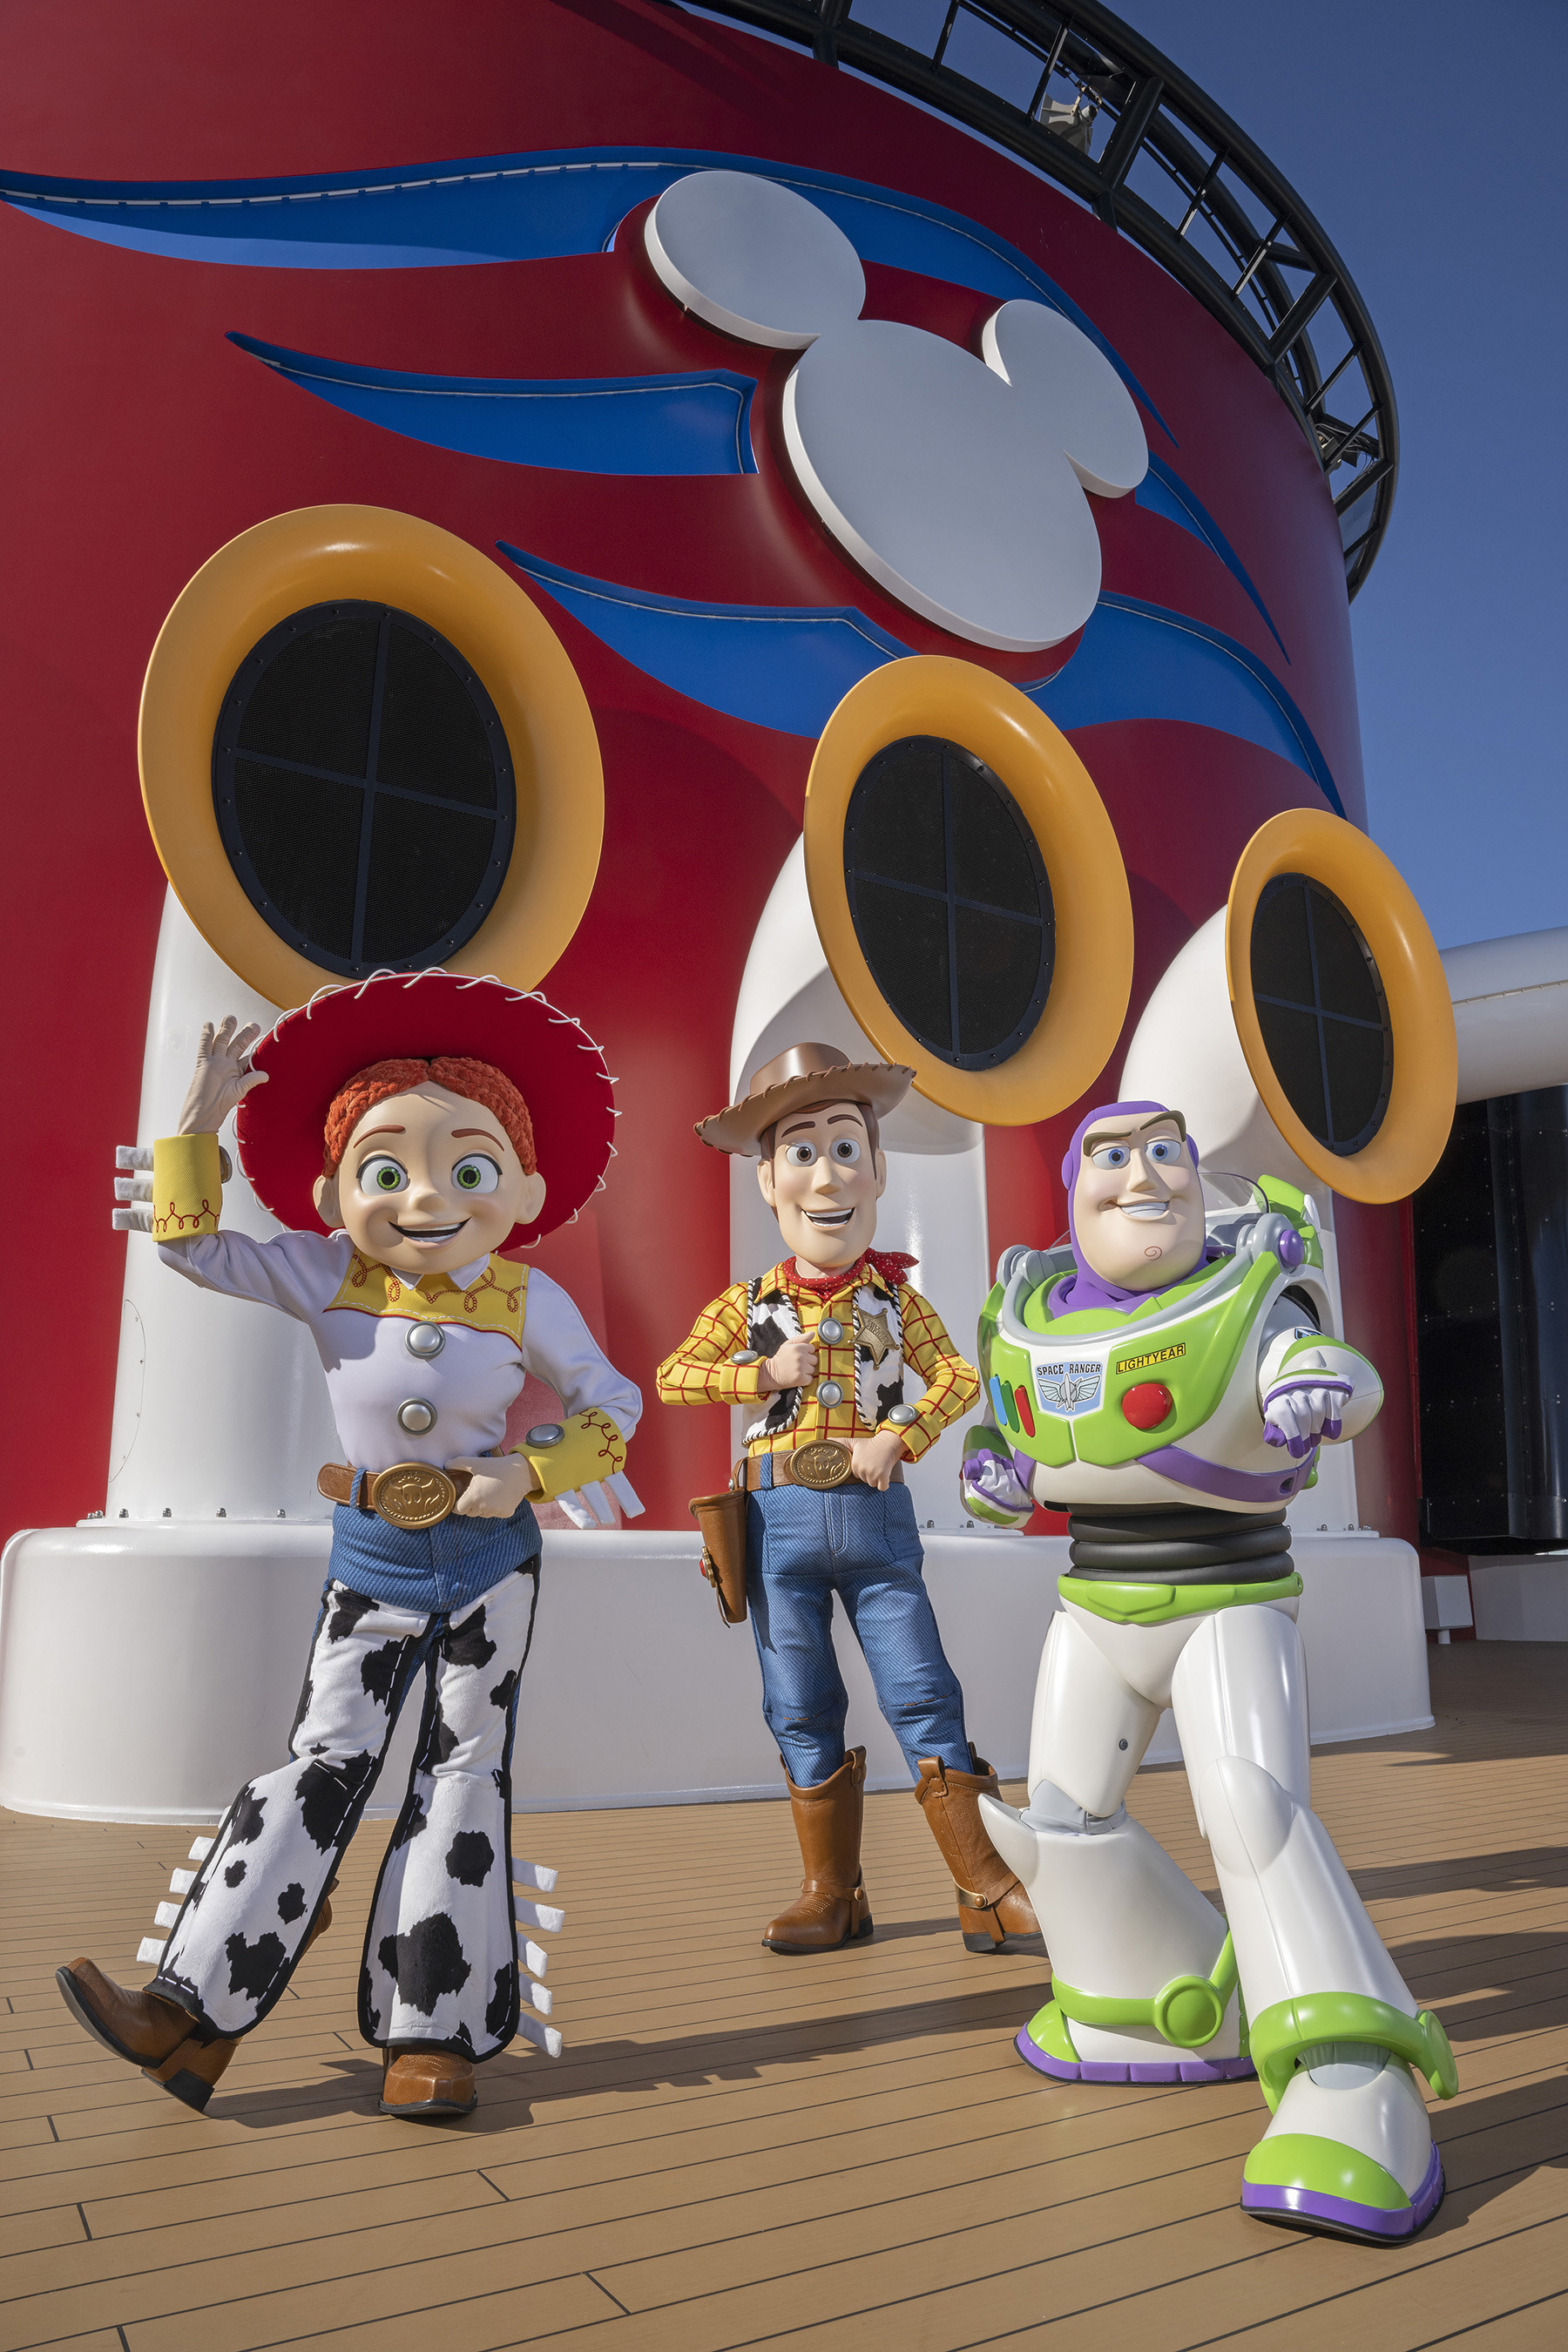 Featuring one-of-a-kind experiences, Pixar Day at Sea will bring to life the beloved tales of “Toy Story,” “Monsters, Inc.,” “The Incredibles,” “Finding Nemo” and more exclusively for Disney Cruise Line guests. (Preston Mack, photographer) (January 2022)